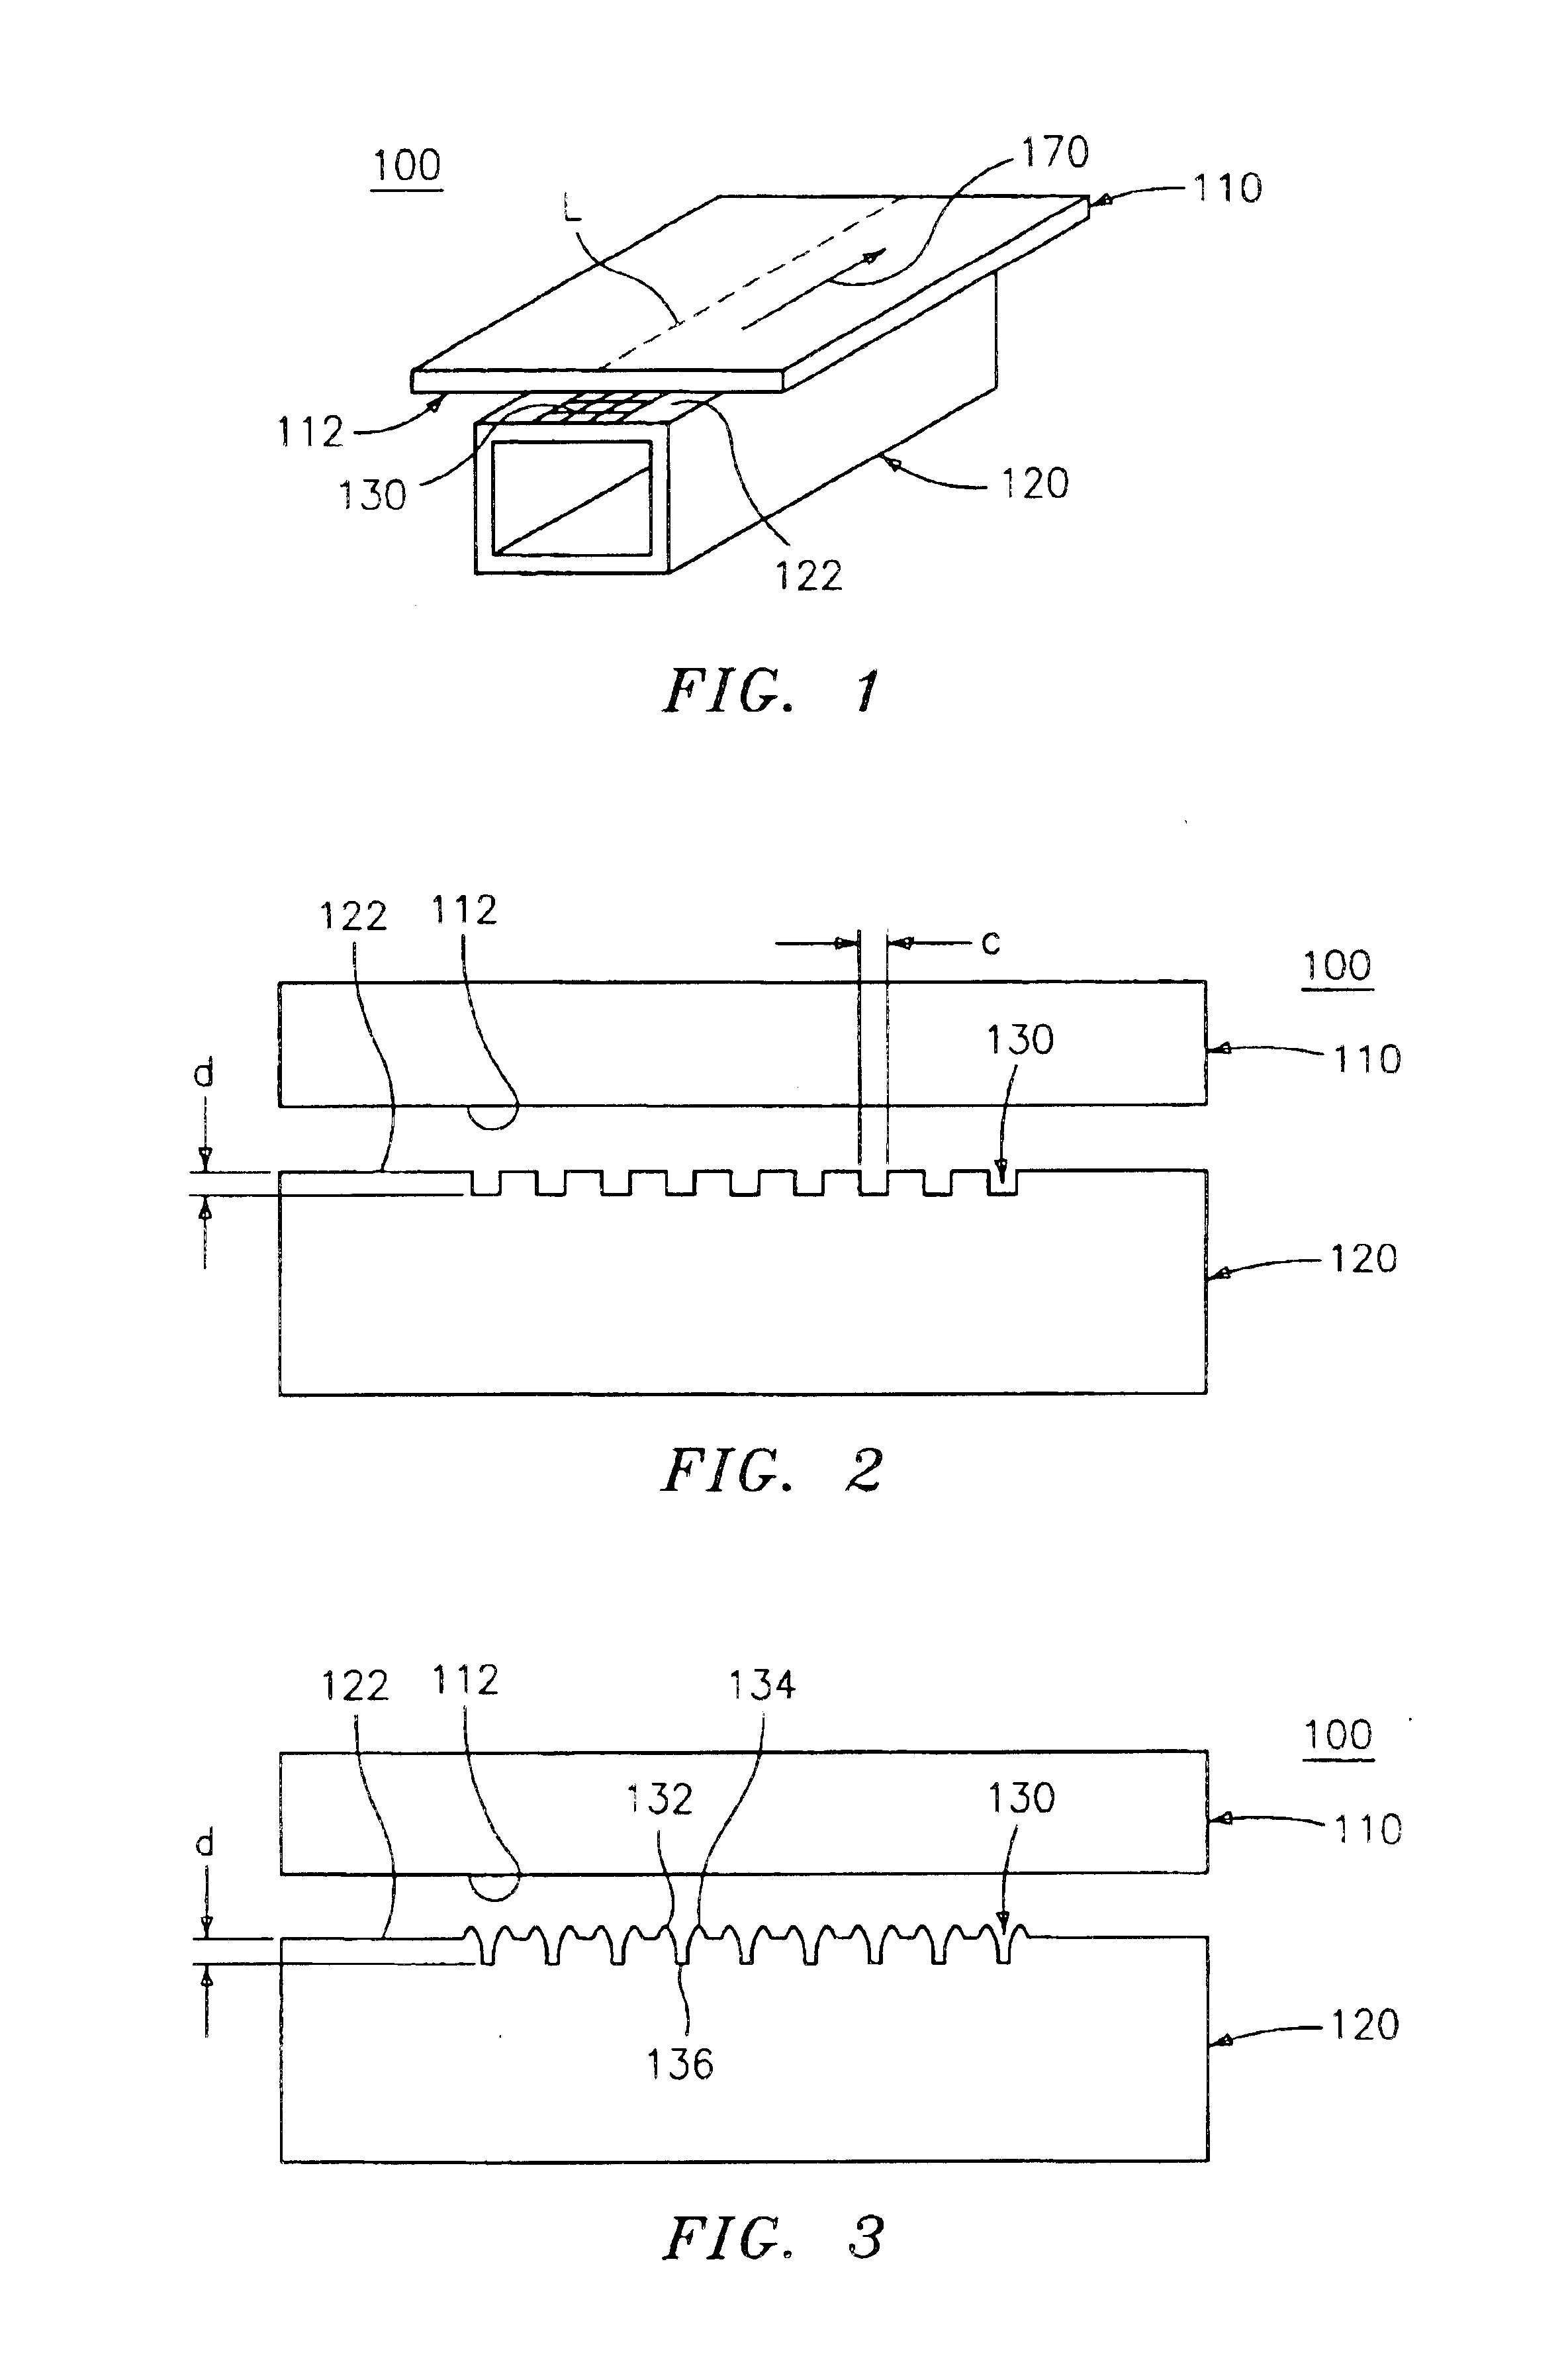 Method of metallurgically bonding articles and article therefor